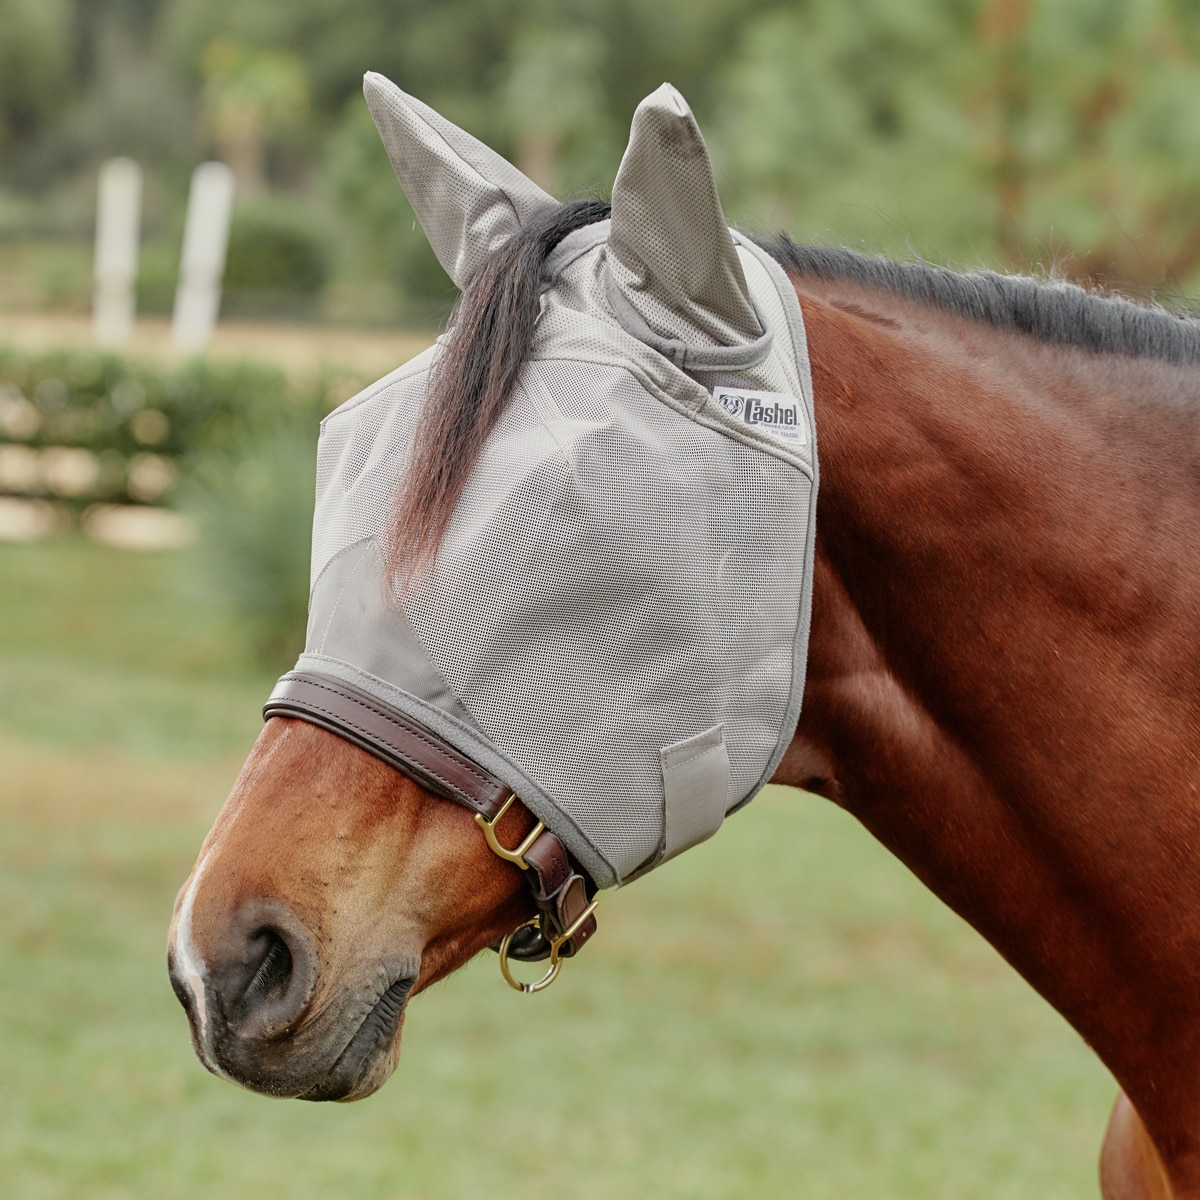 Comfort Fit Horse&Arab Lycra Riding Fly Full Mask Mesh with Ears AVERAGE Sizes 